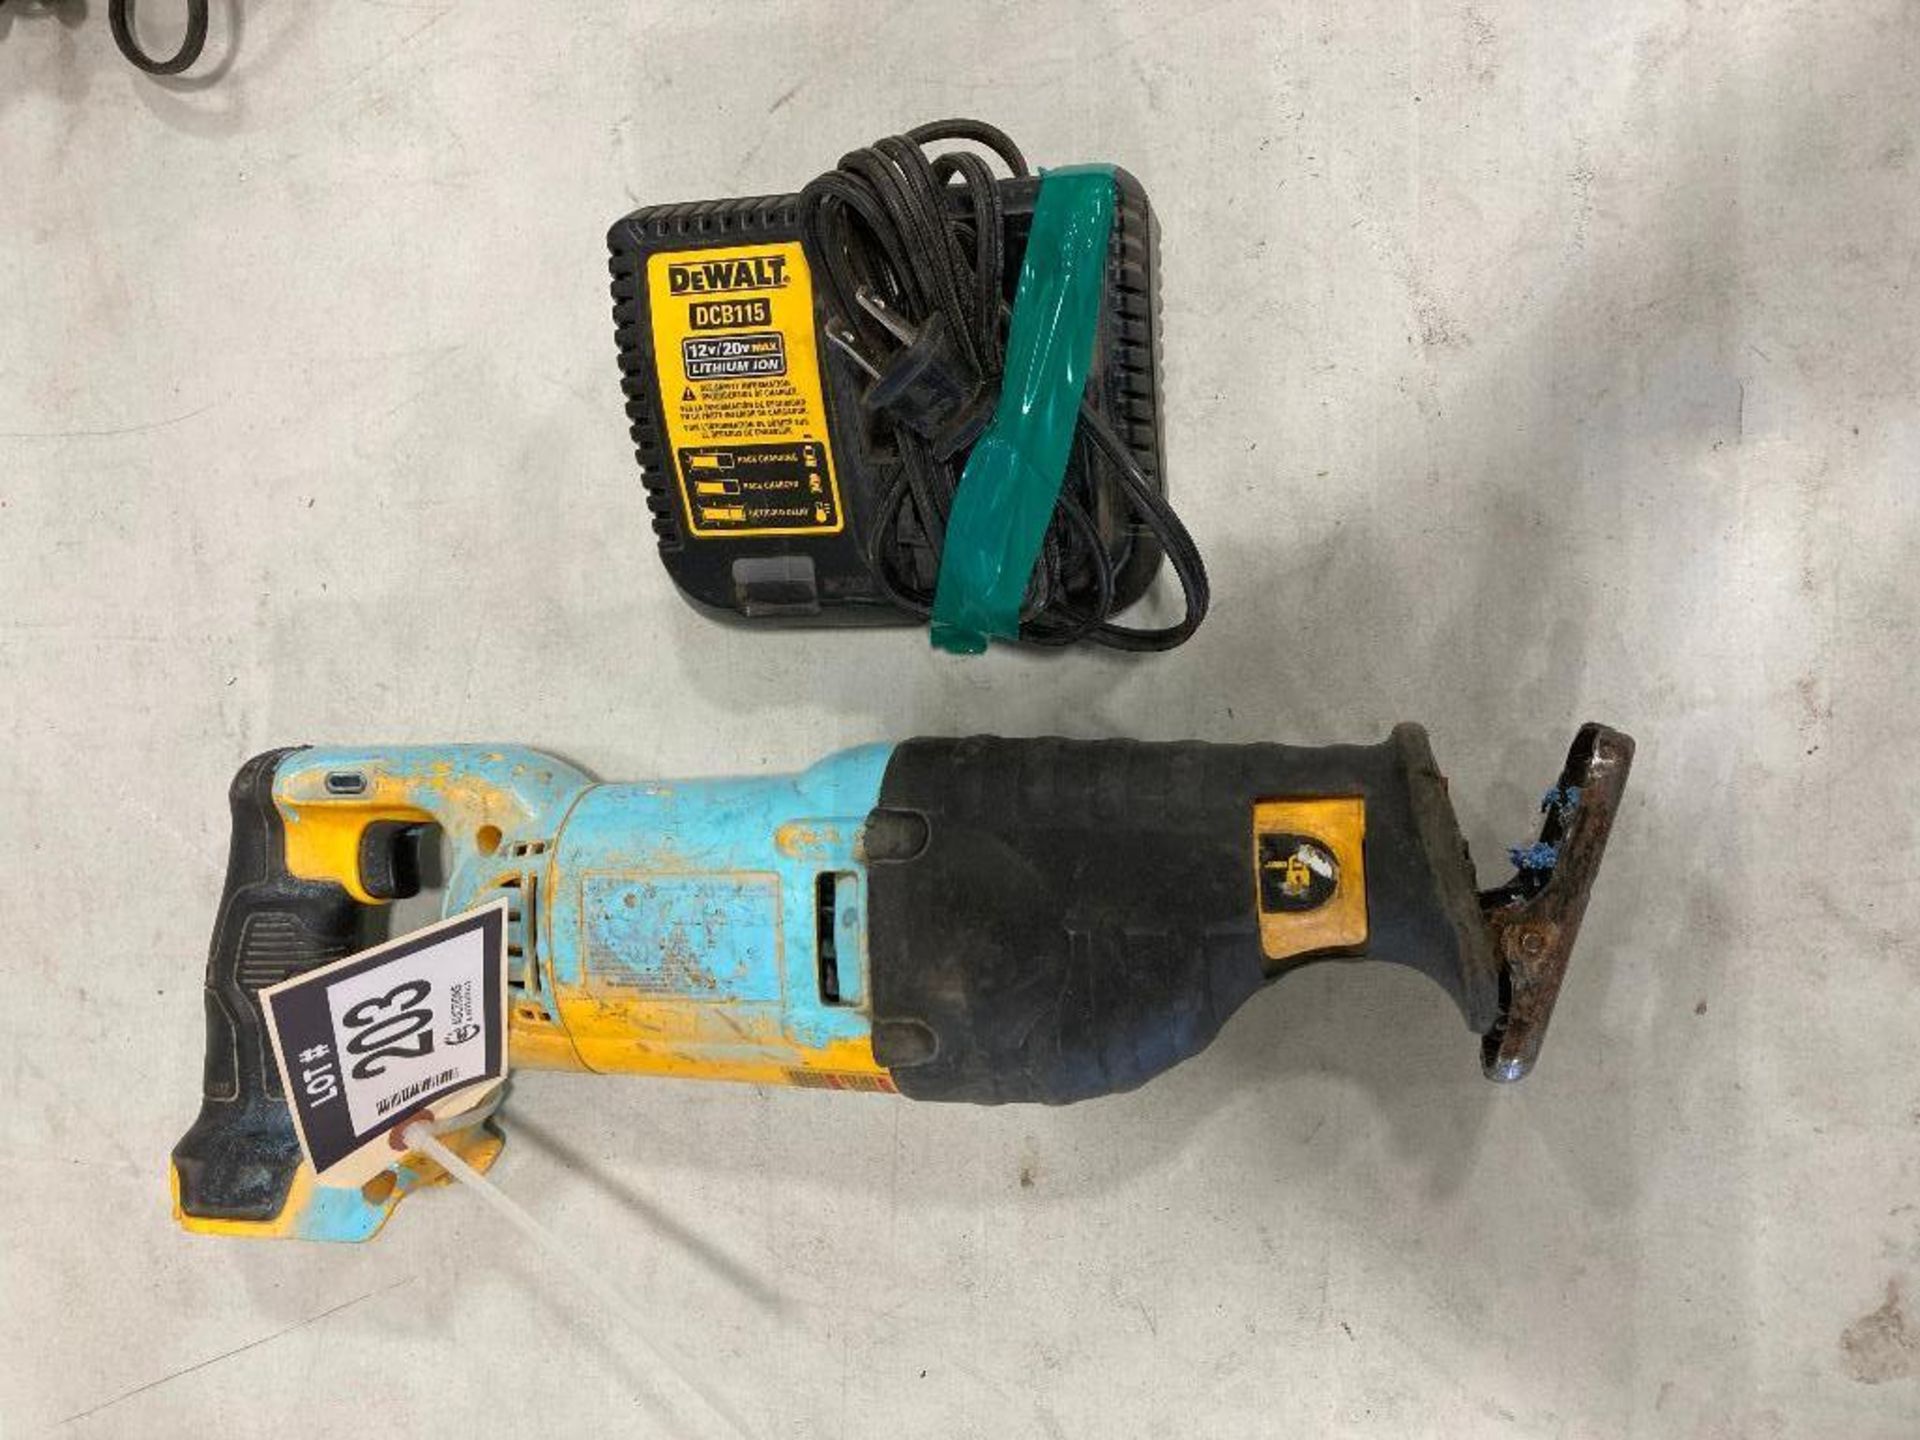 DeWalt Reciprocating Saw with Battery Charger